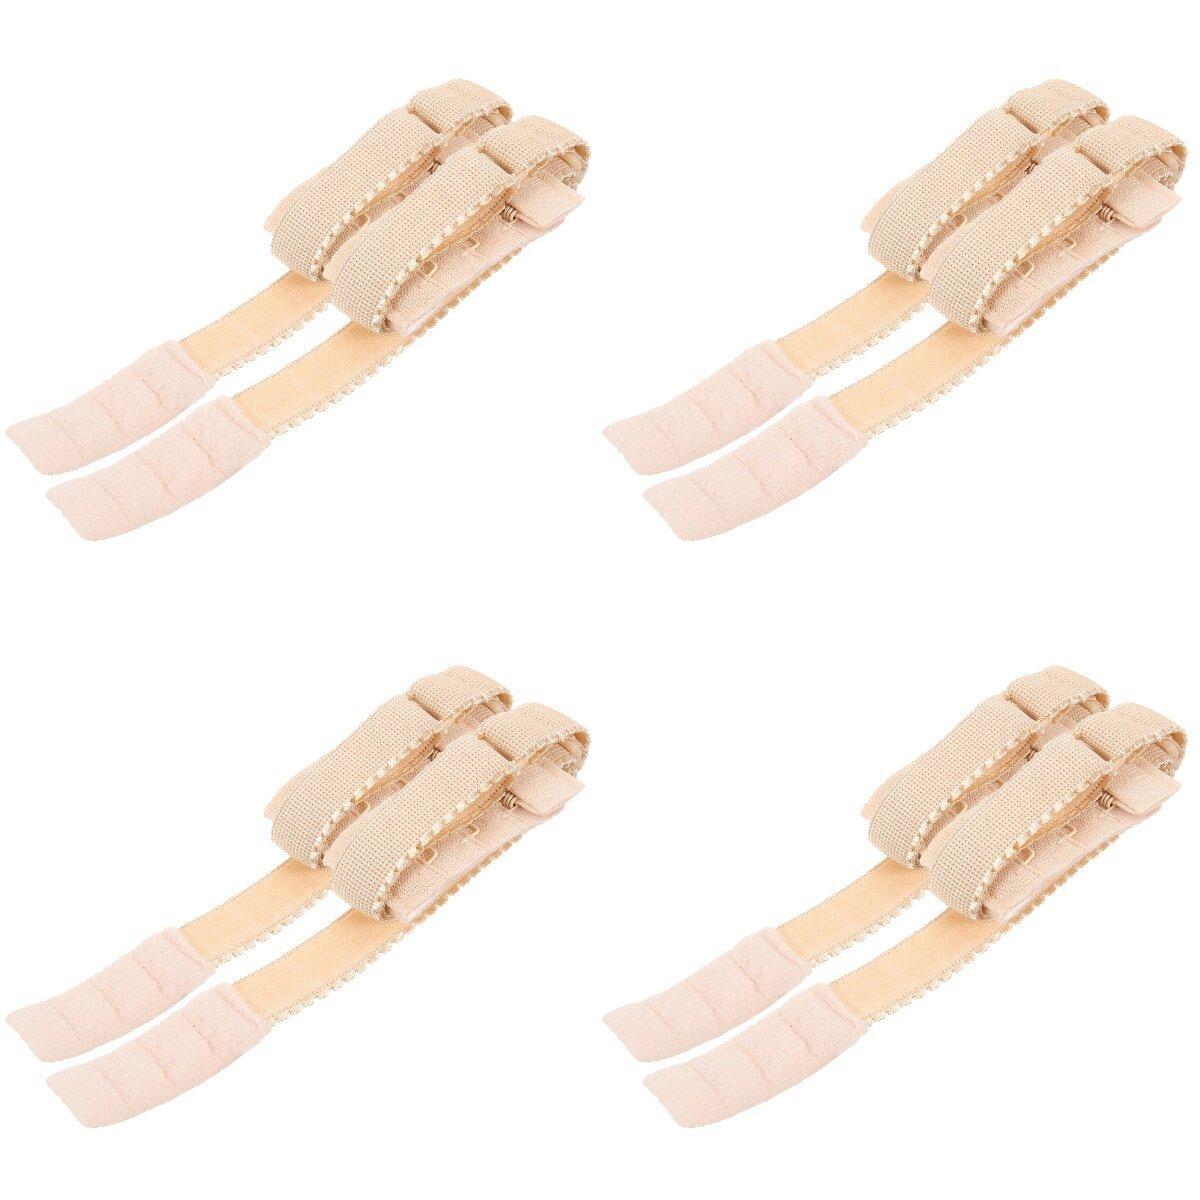 8 Pcs Low Back Bra Adapter Strap Extender Backless Dress Strapless Accessories Girl